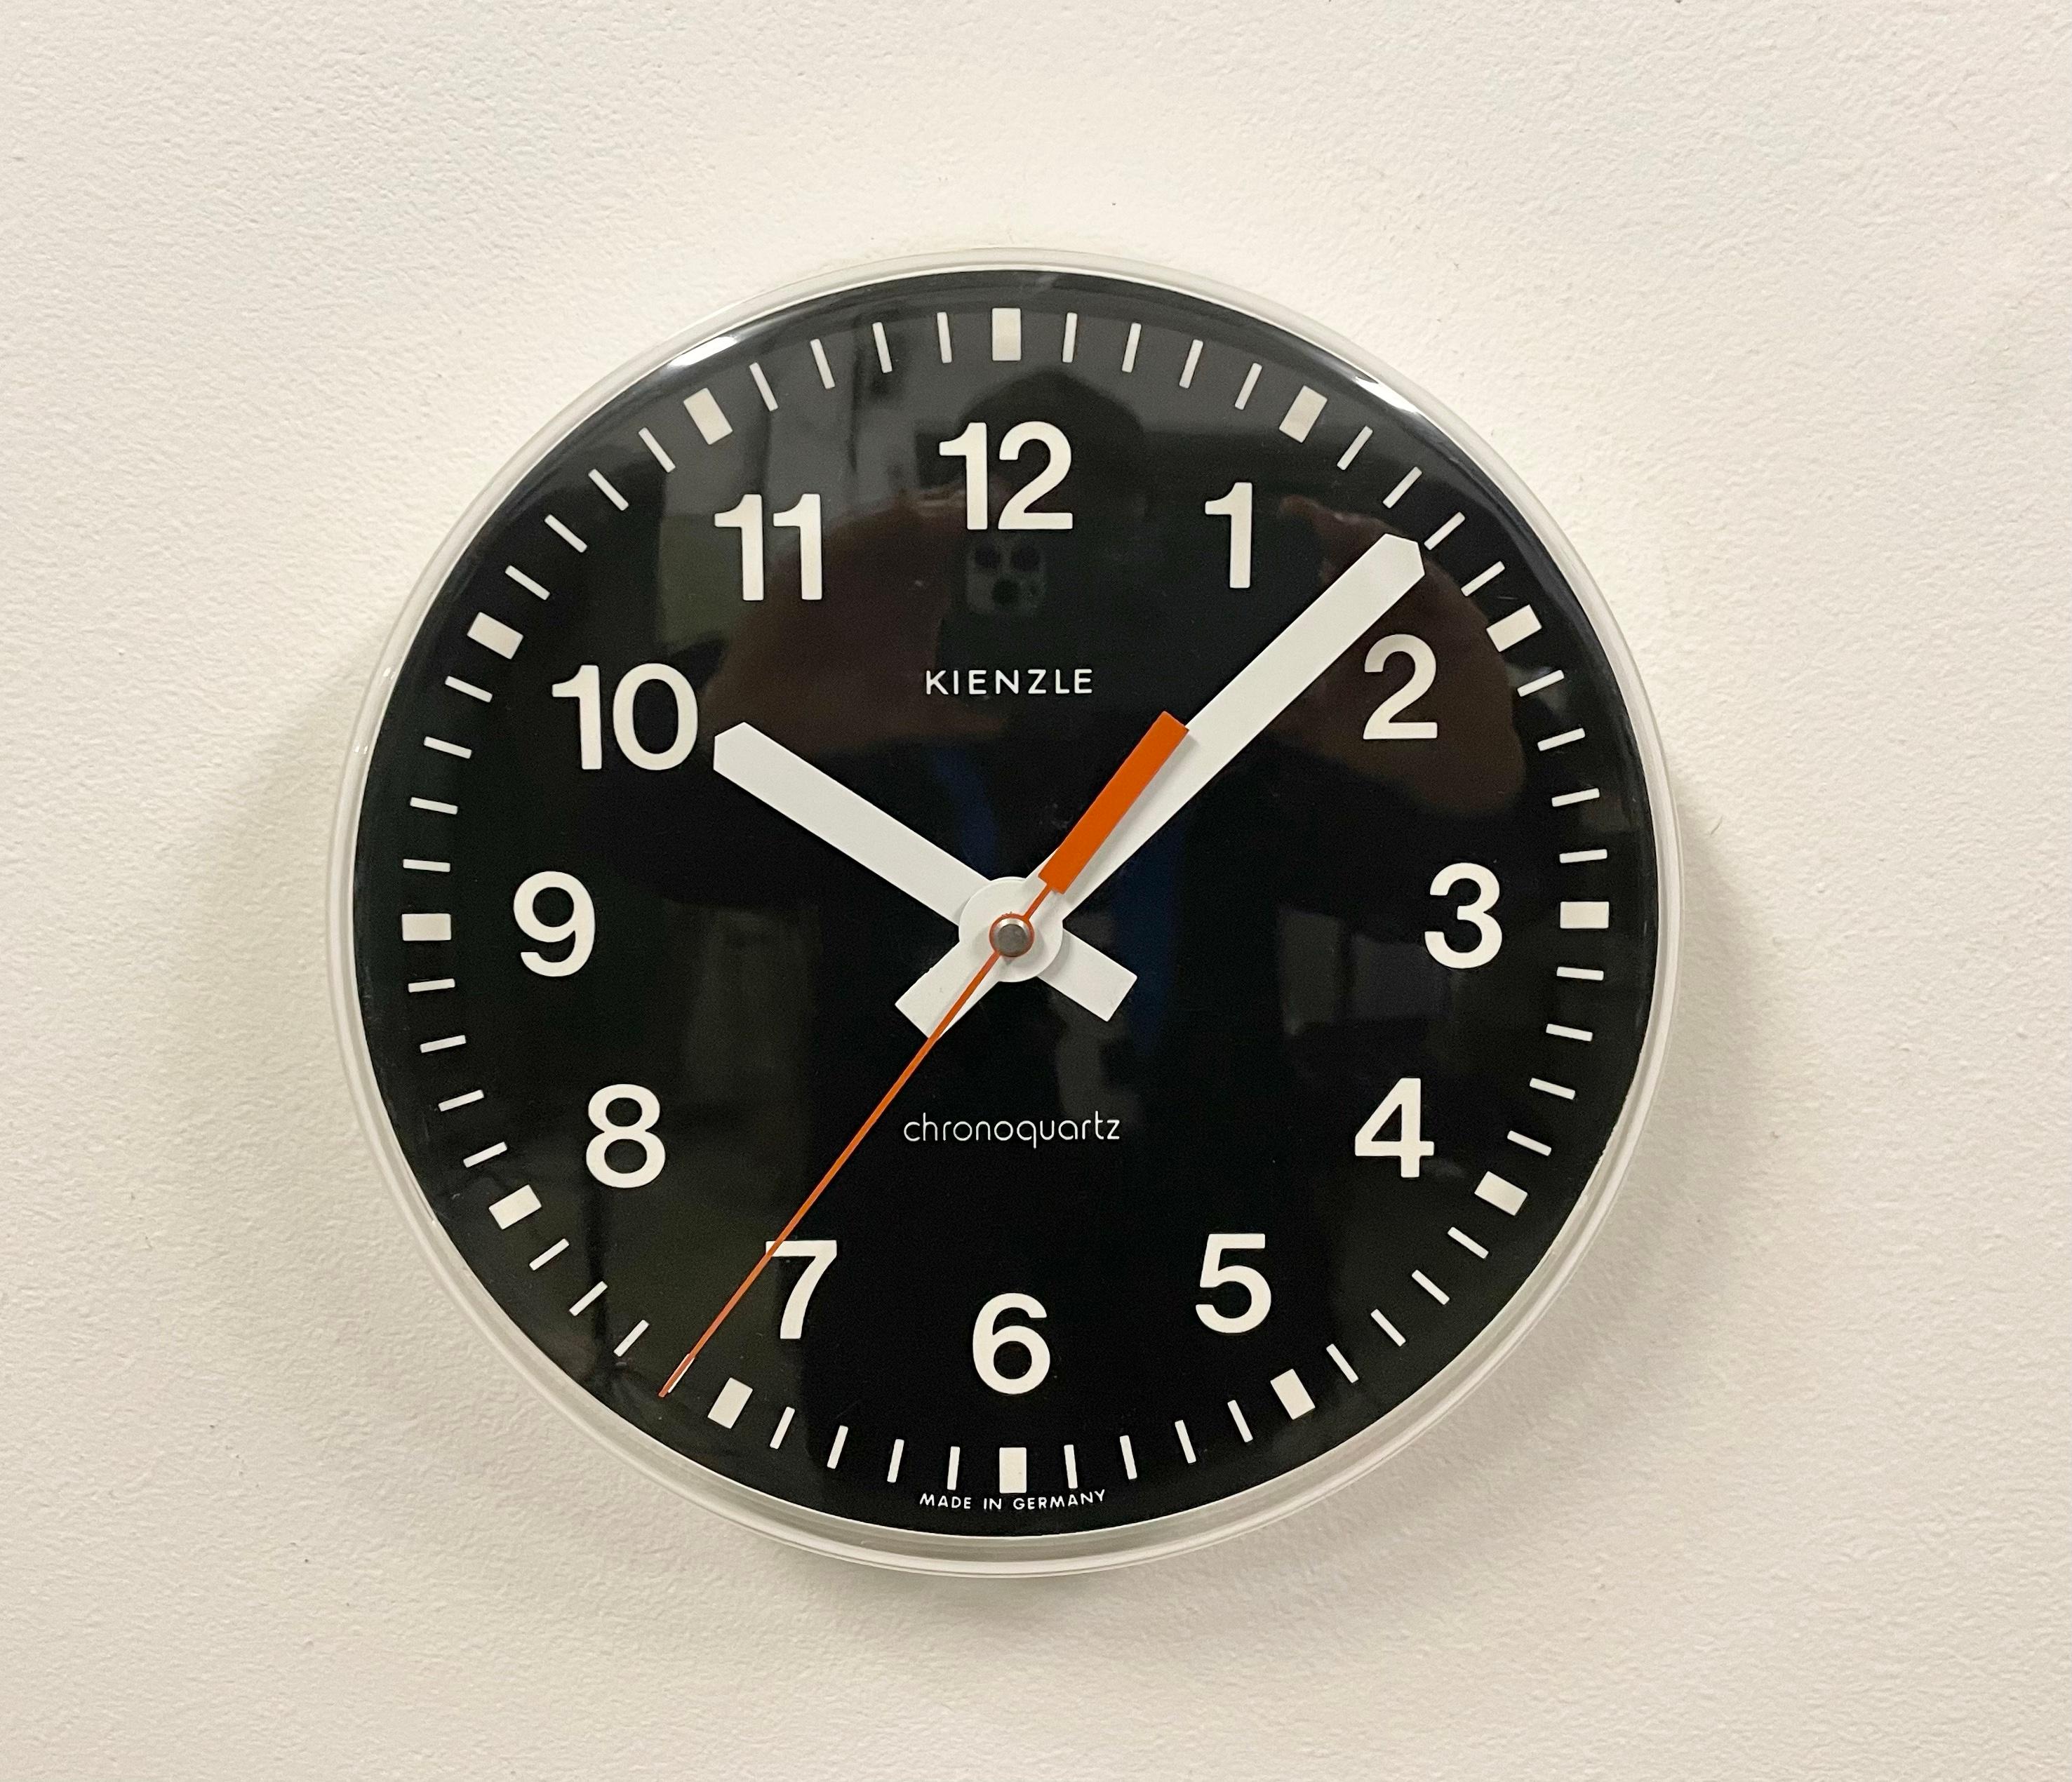 Vintage wall clock was produced by Kinzle Clock in Germany during the 1970s. It features a white bakelite frame with black dial and a clear plastic glass cover. The battery-powered clockwork requires one C battery. The diameter of the clock is 22